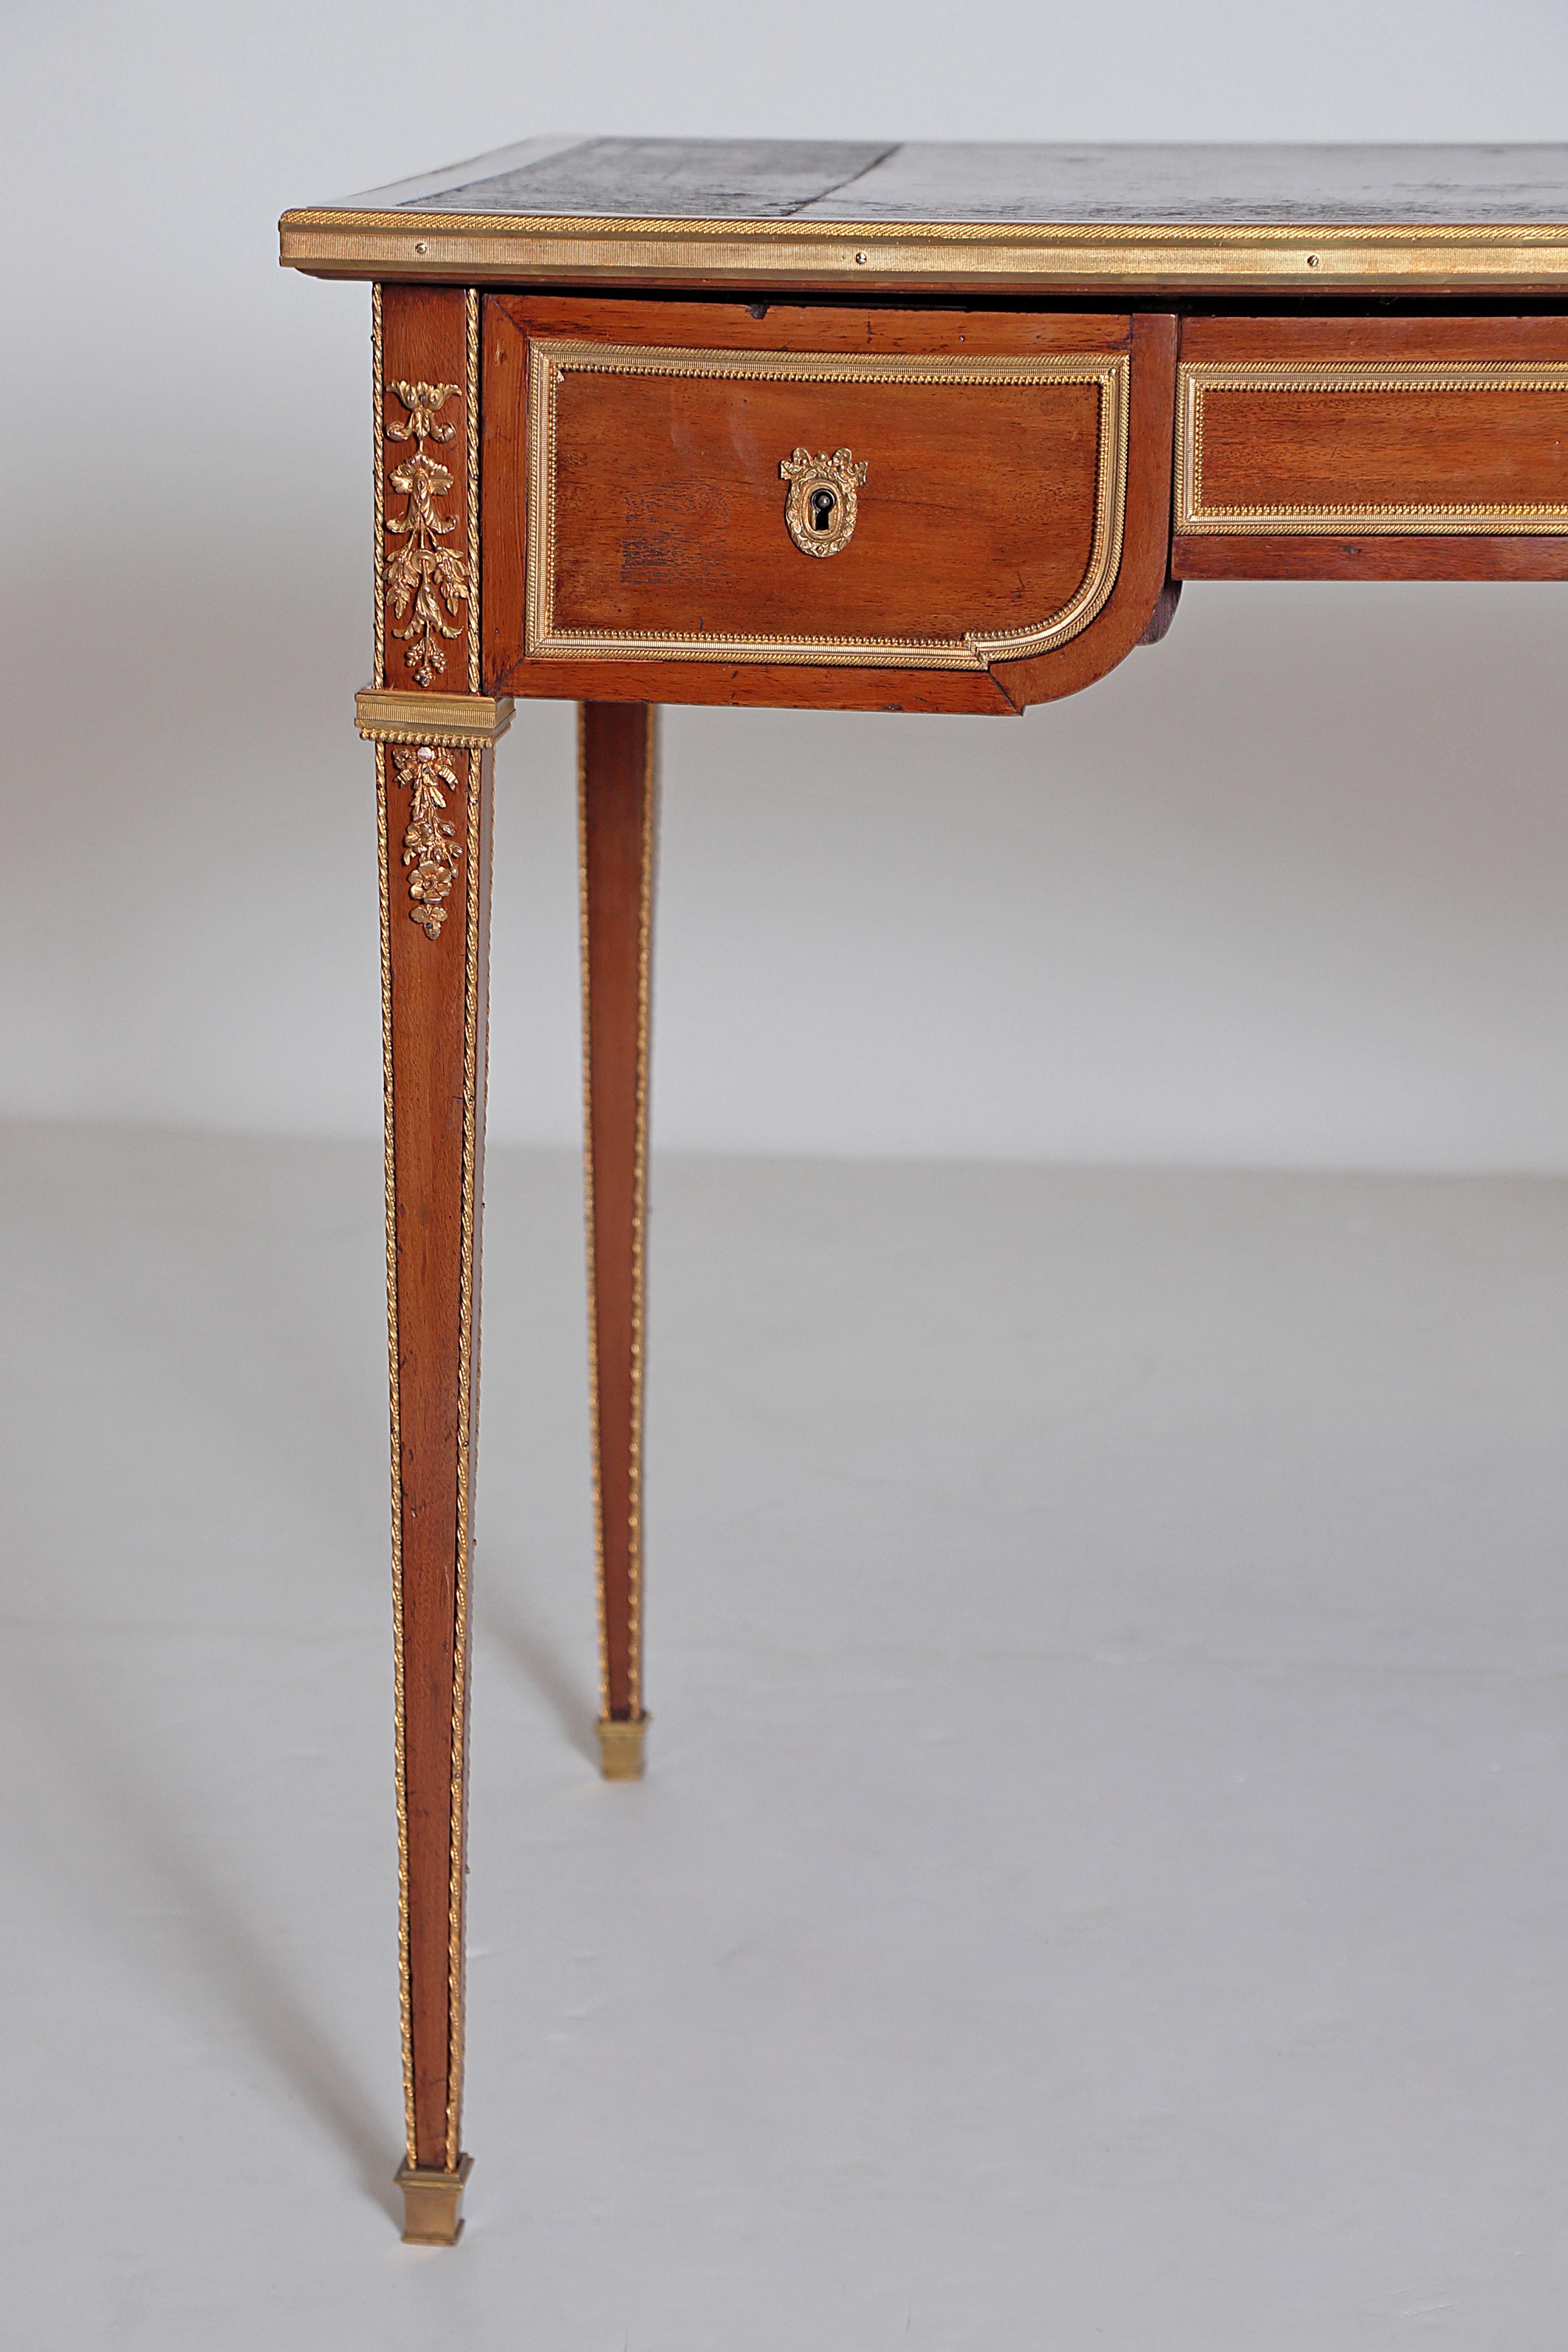 French Louis XVI Style Writing Table with Red Leather Writing Surface